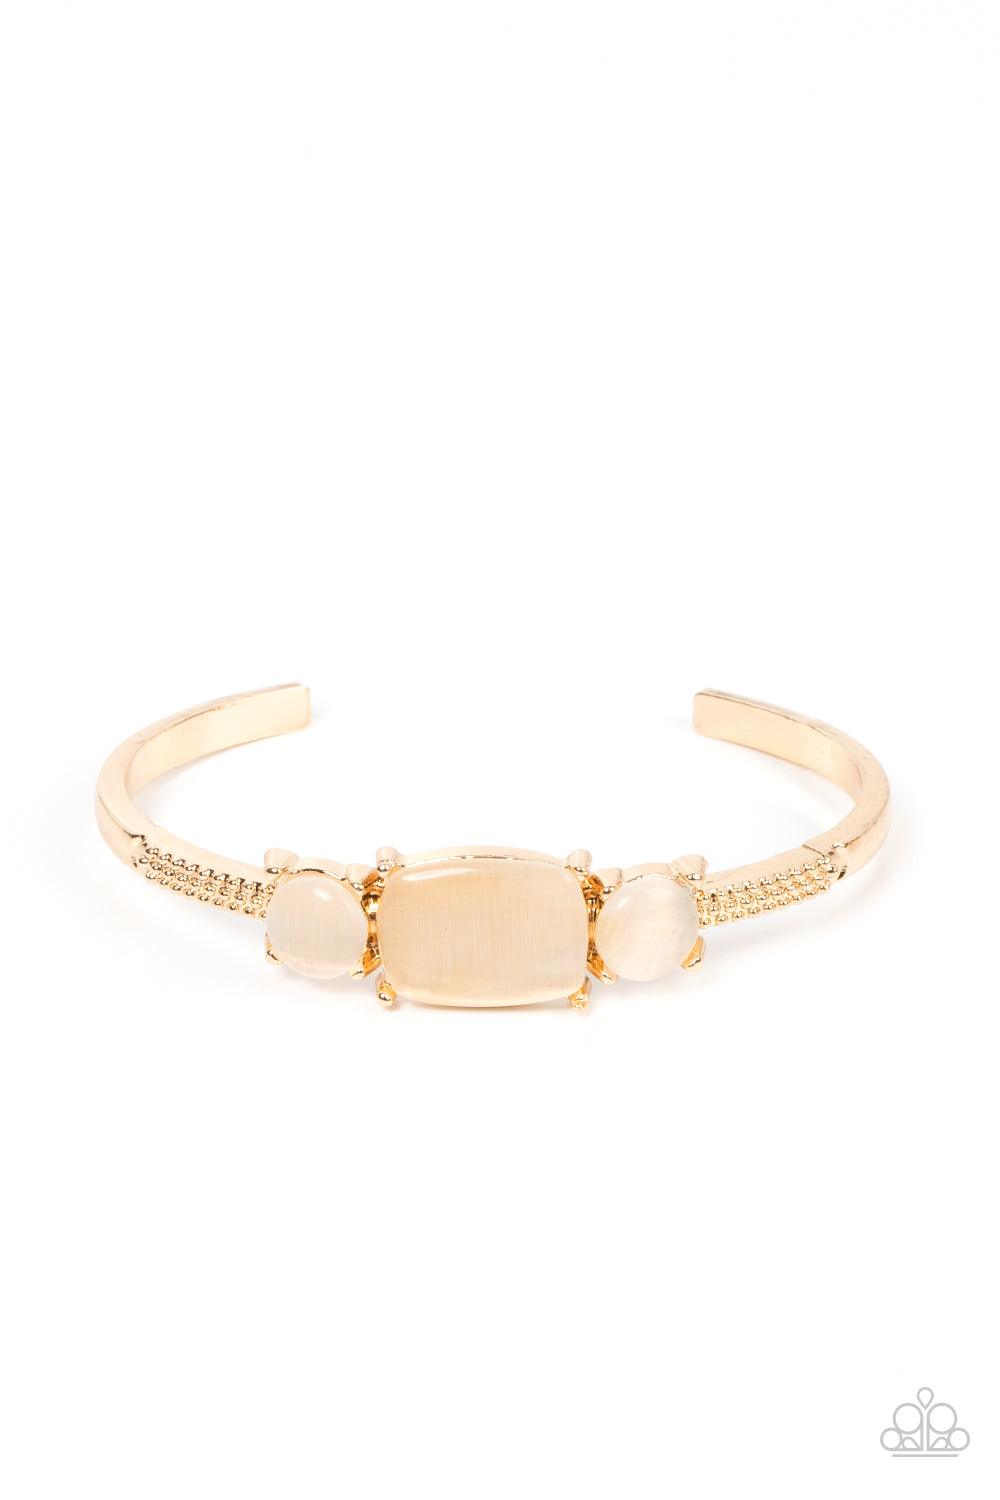 Paparazzi Accessories Tranquil Treasure - Gold A rectangular golden cat's eye stone is flanked by a pair of golden cat's eye stones atop a textured gold cuff, resulting in a dainty pop of color atop the wrist. Sold as one individual bracelet. Bracelets